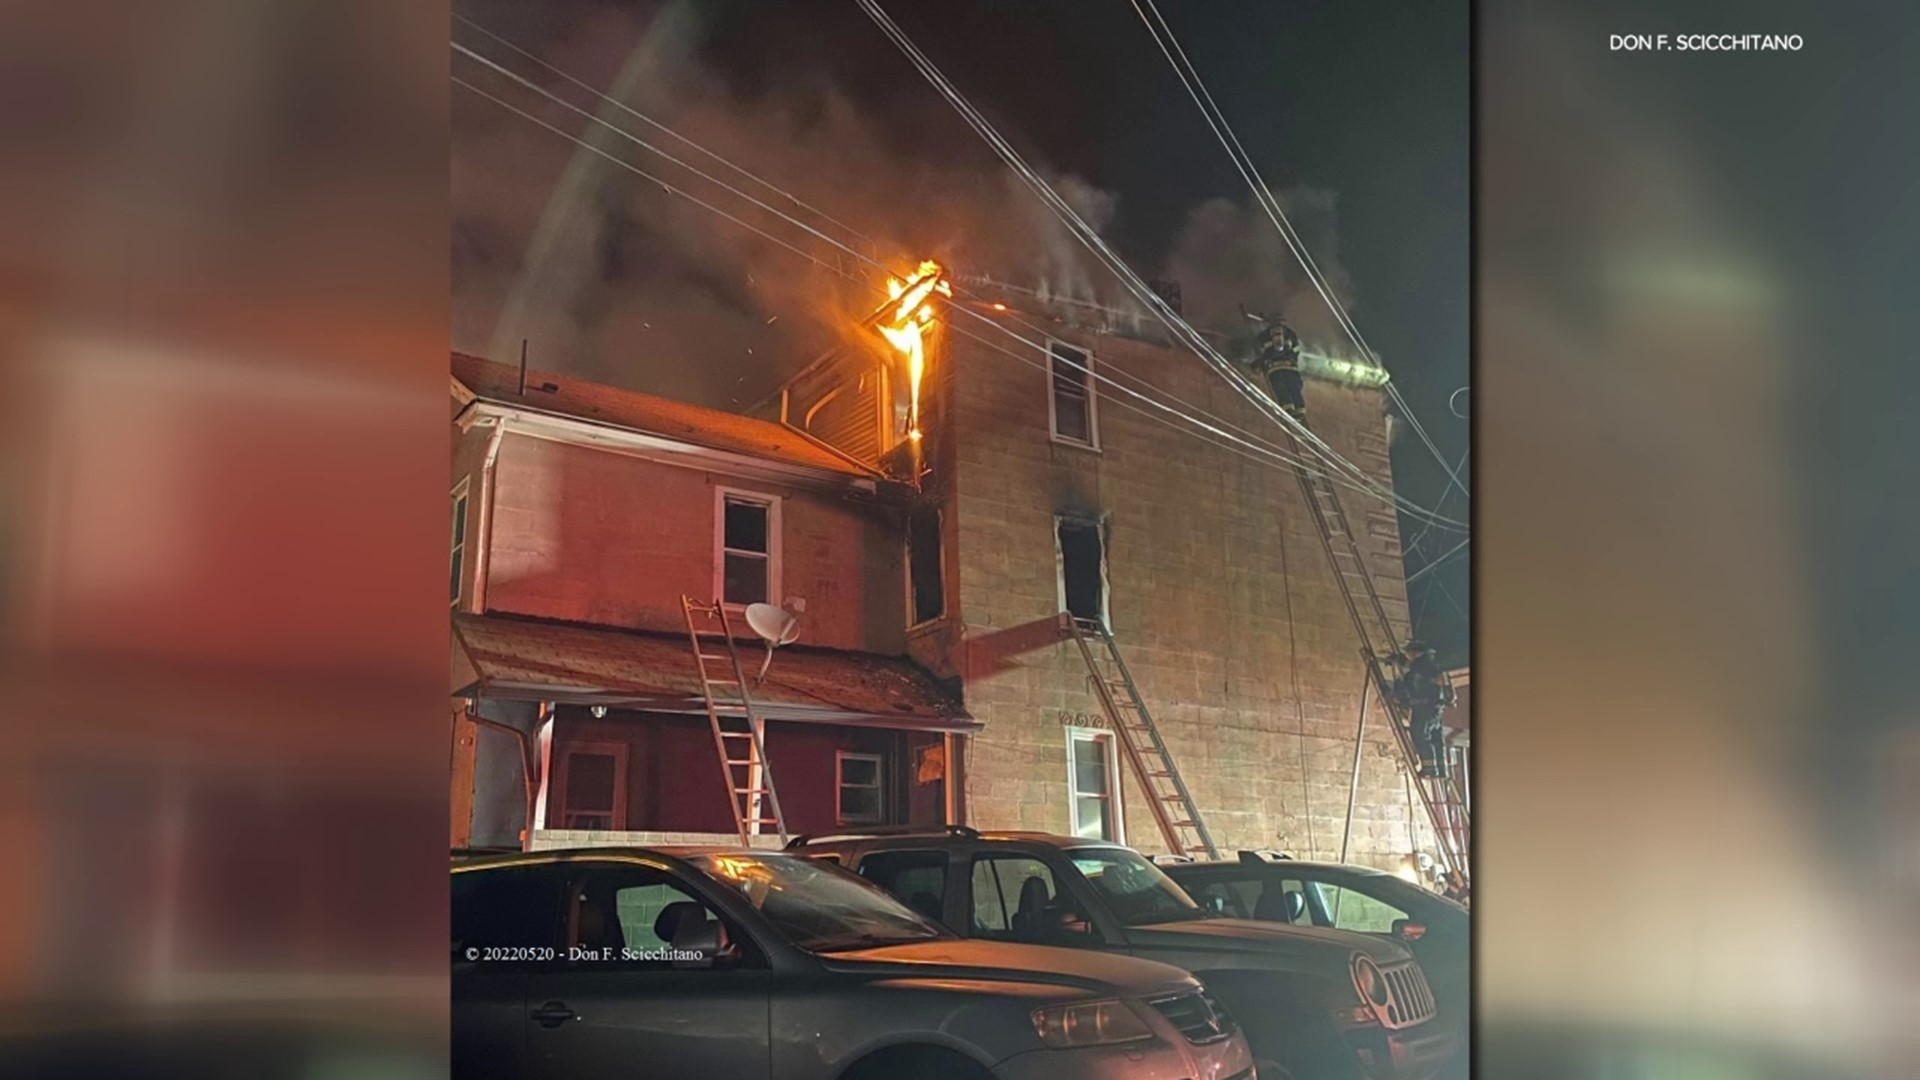 Flames broke out around 10 p.m. Friday night along the 600 block of North Franklin Street in the city.